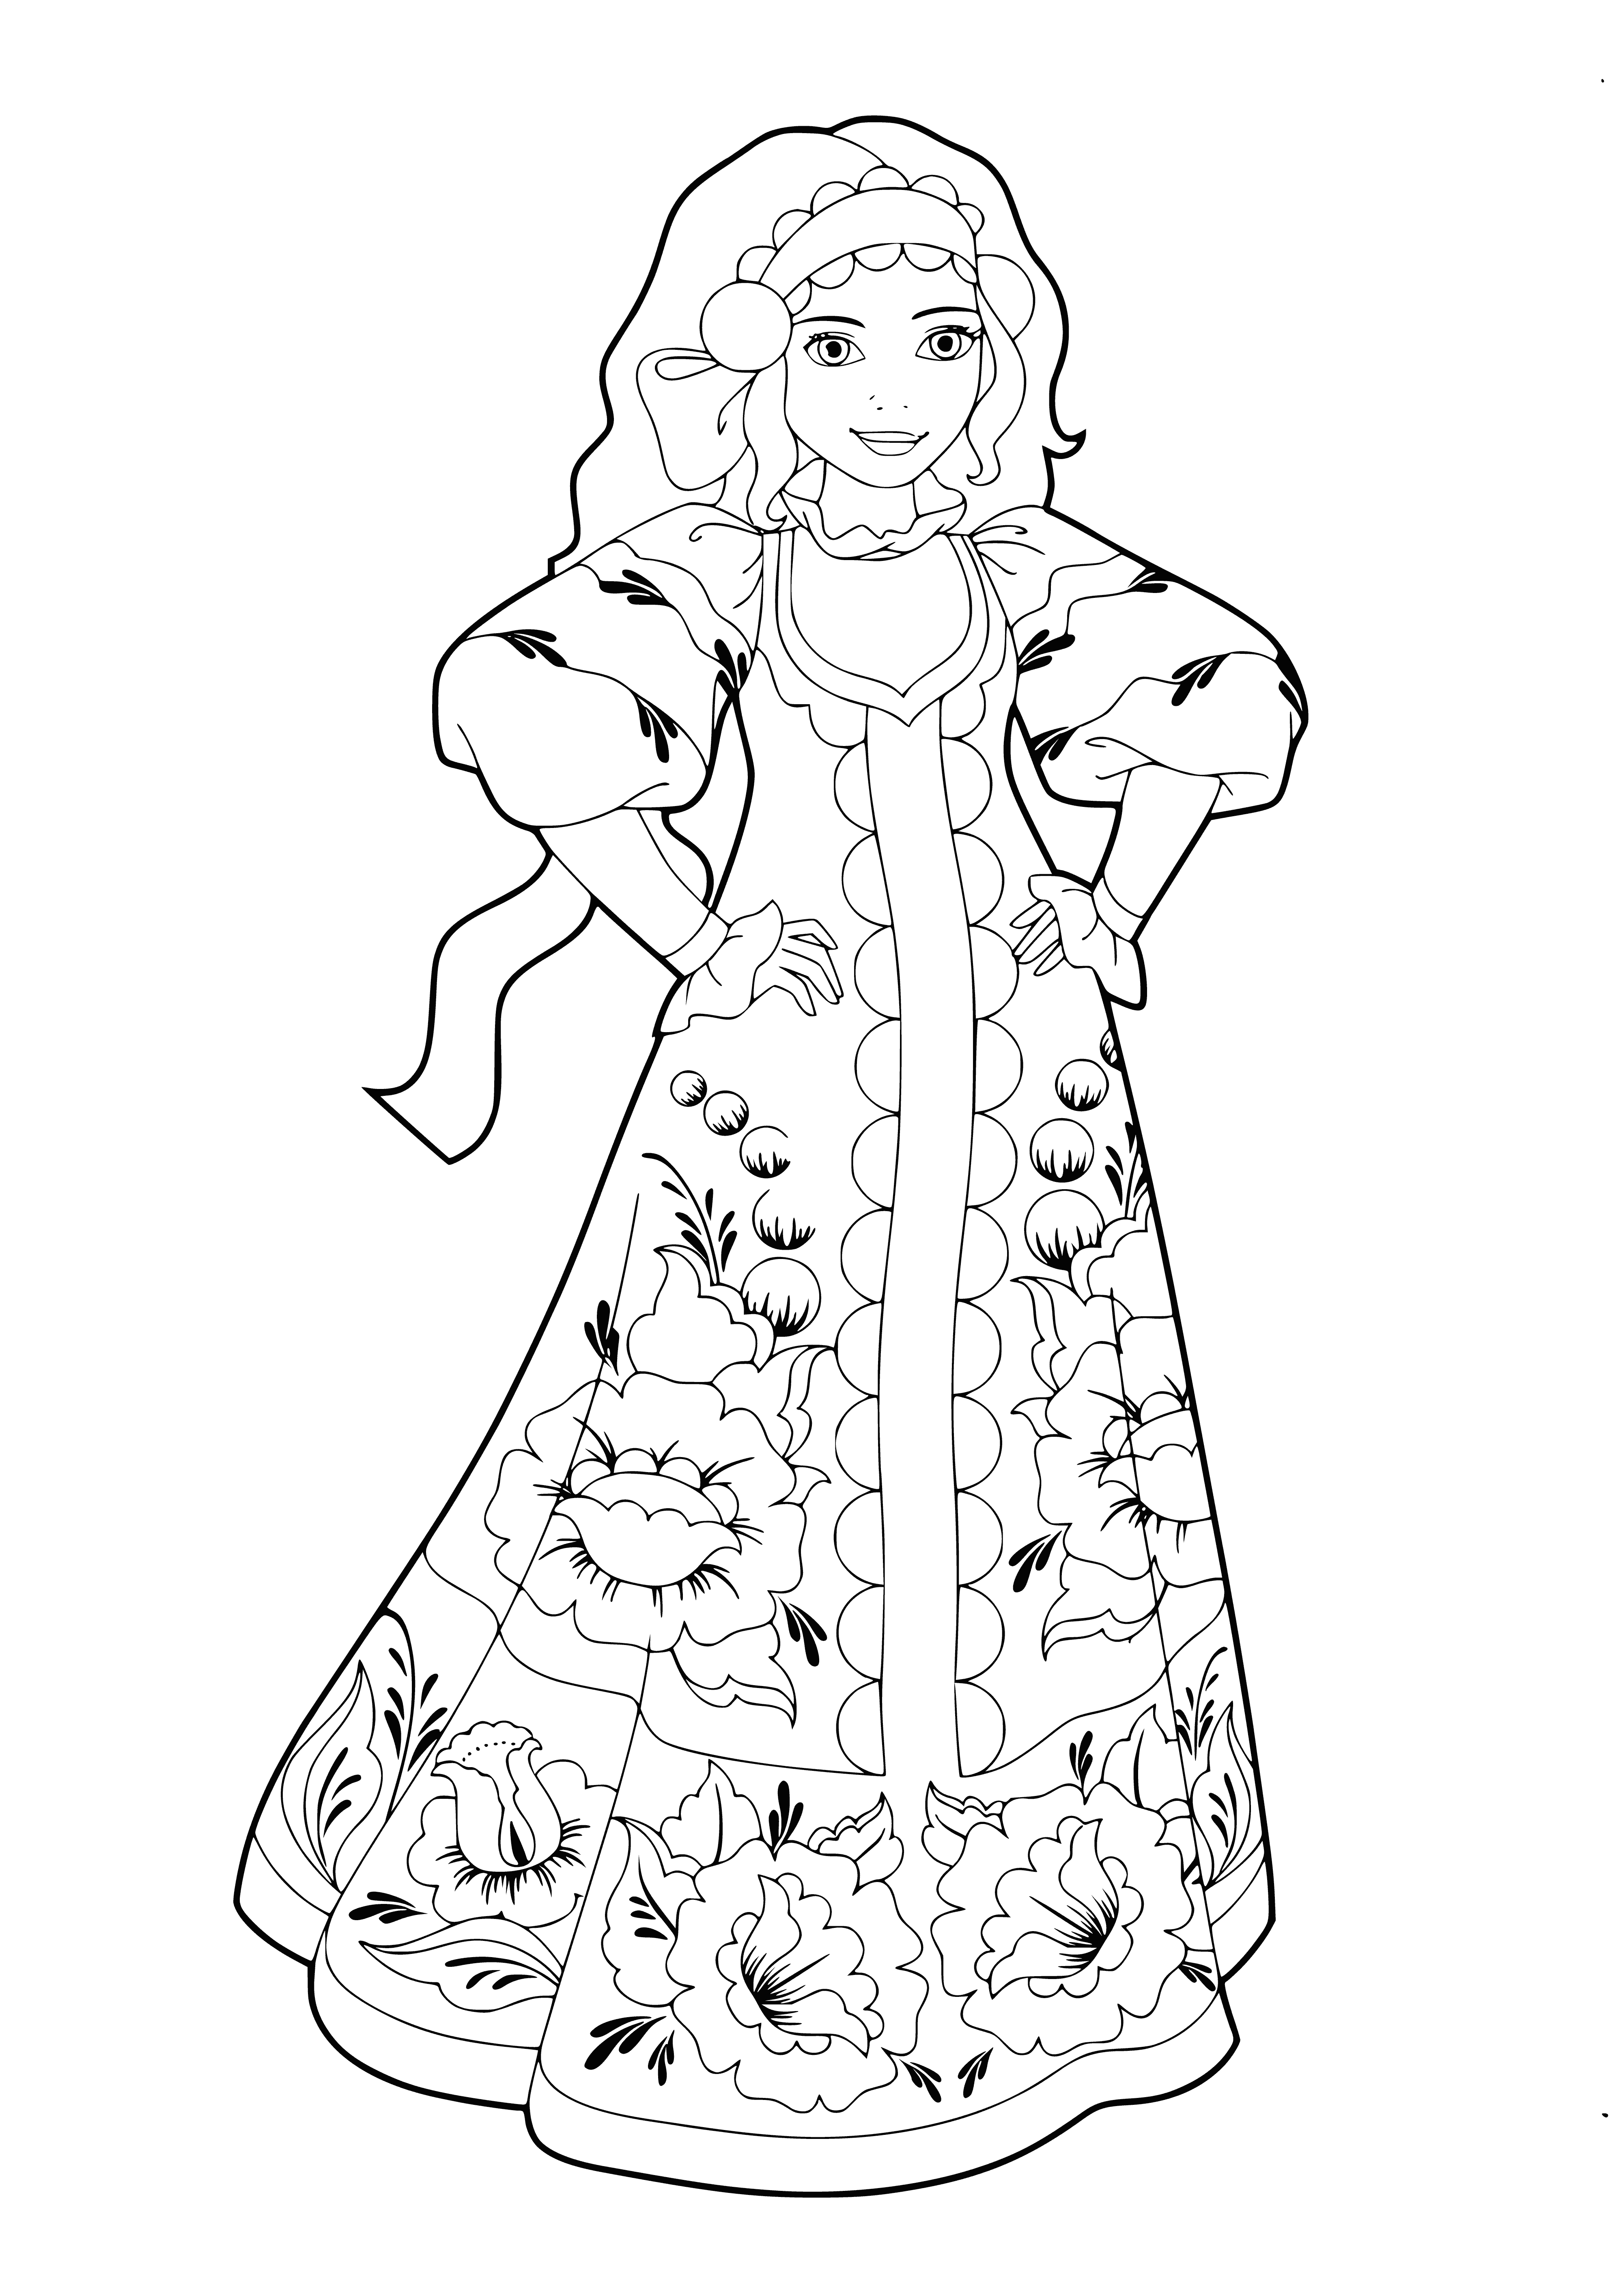 coloring page: Three Russian beauties in green, blue and red dresses, smiling with arms crossed.